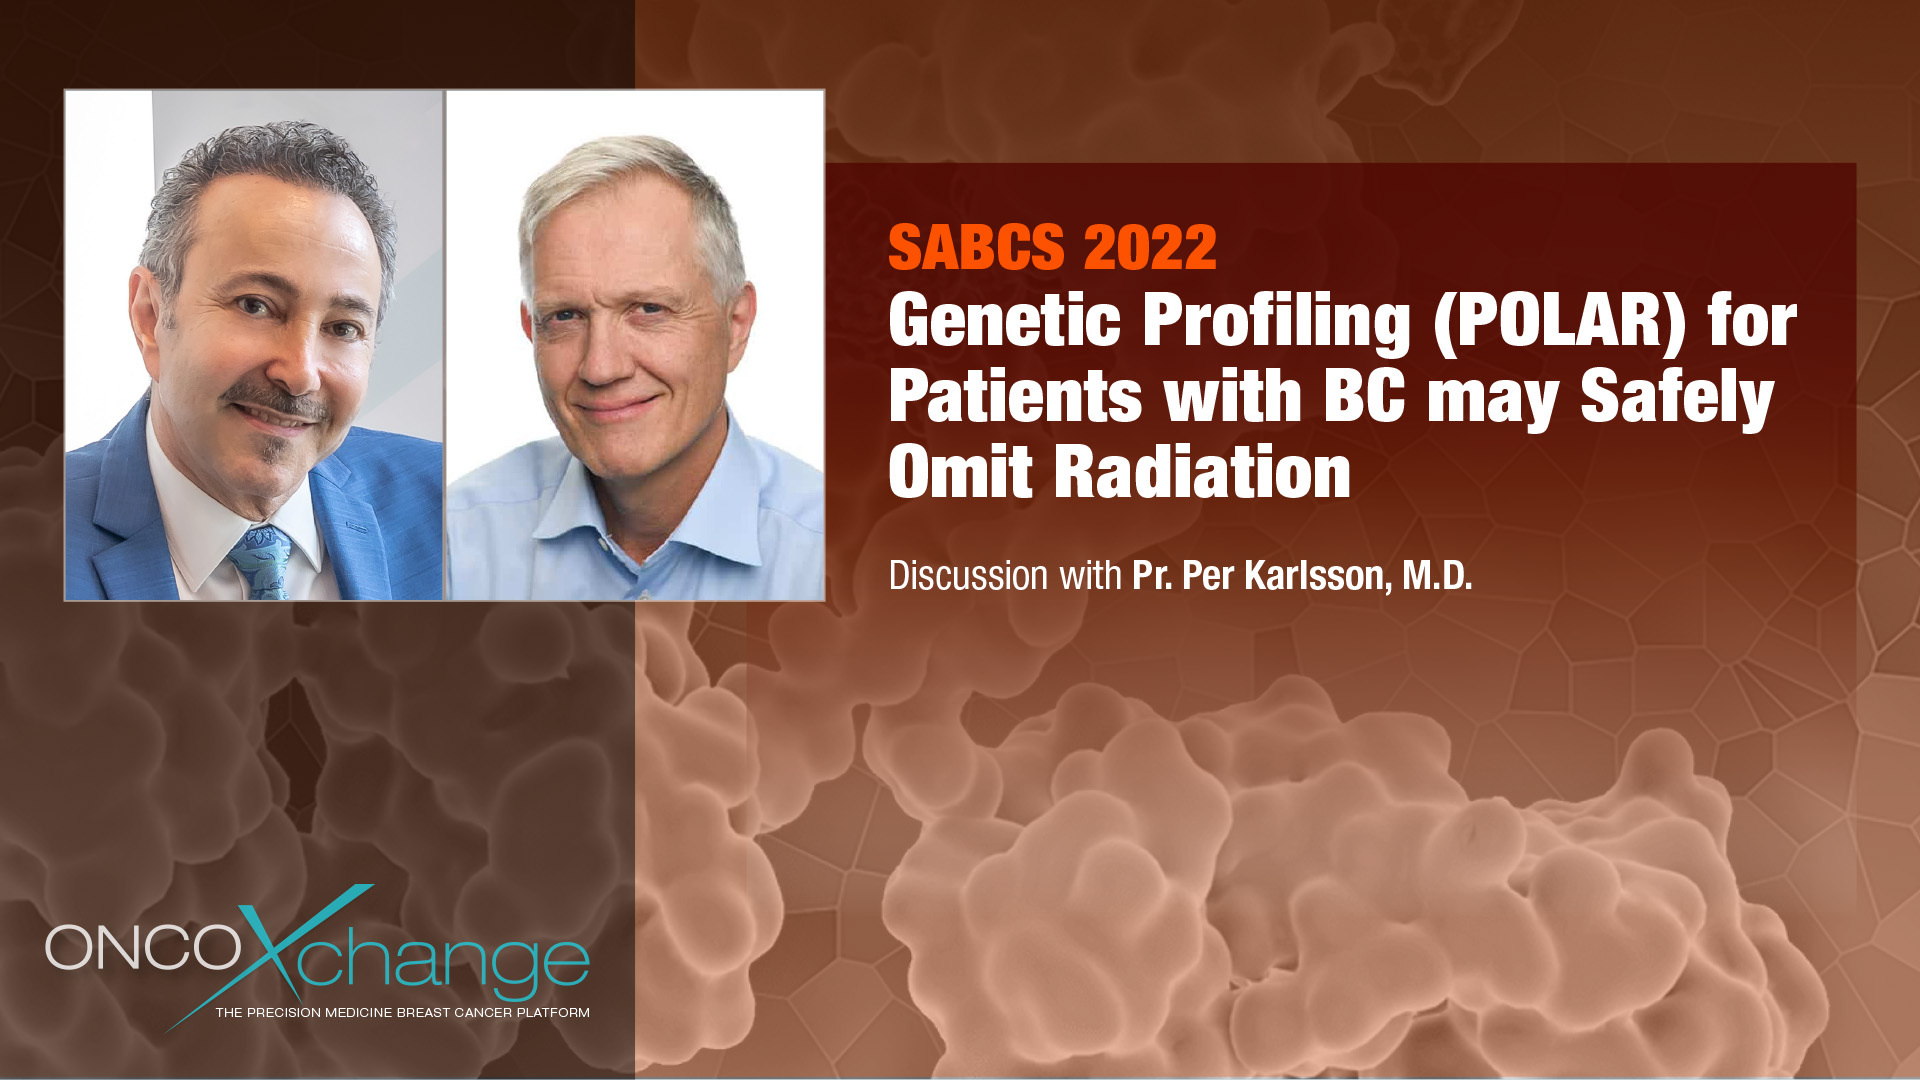 SABCS 2022 : Genetic Profiling (POLAR) for Patients with BC may Safely Omit Radiation